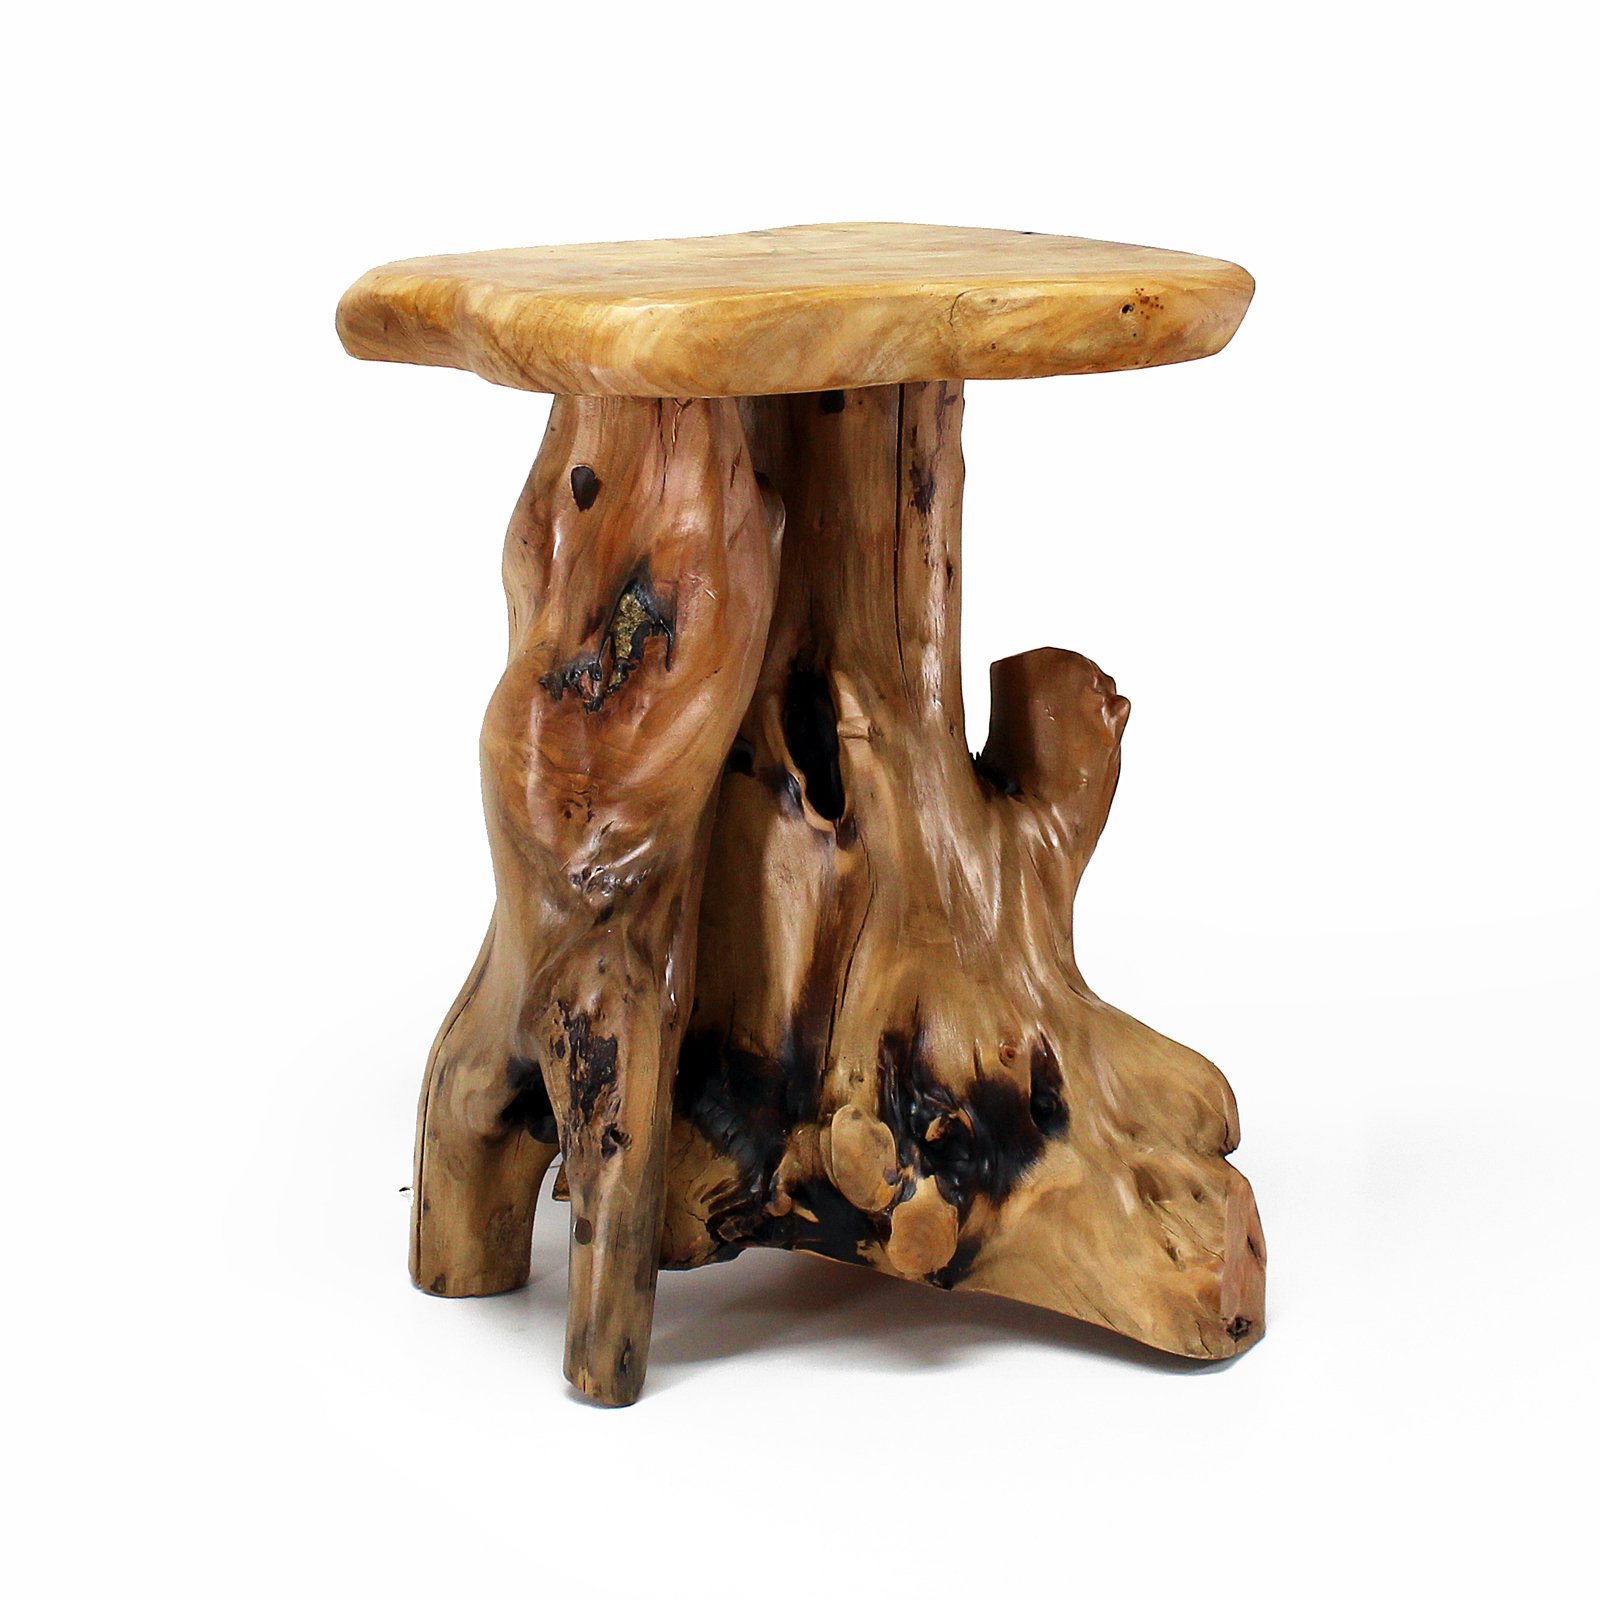 welland tree stump side table live edge stool tall end details about asian style couches mismatched sofa and chair hello kitty bedroom kmart lawn garden powell mirrored console